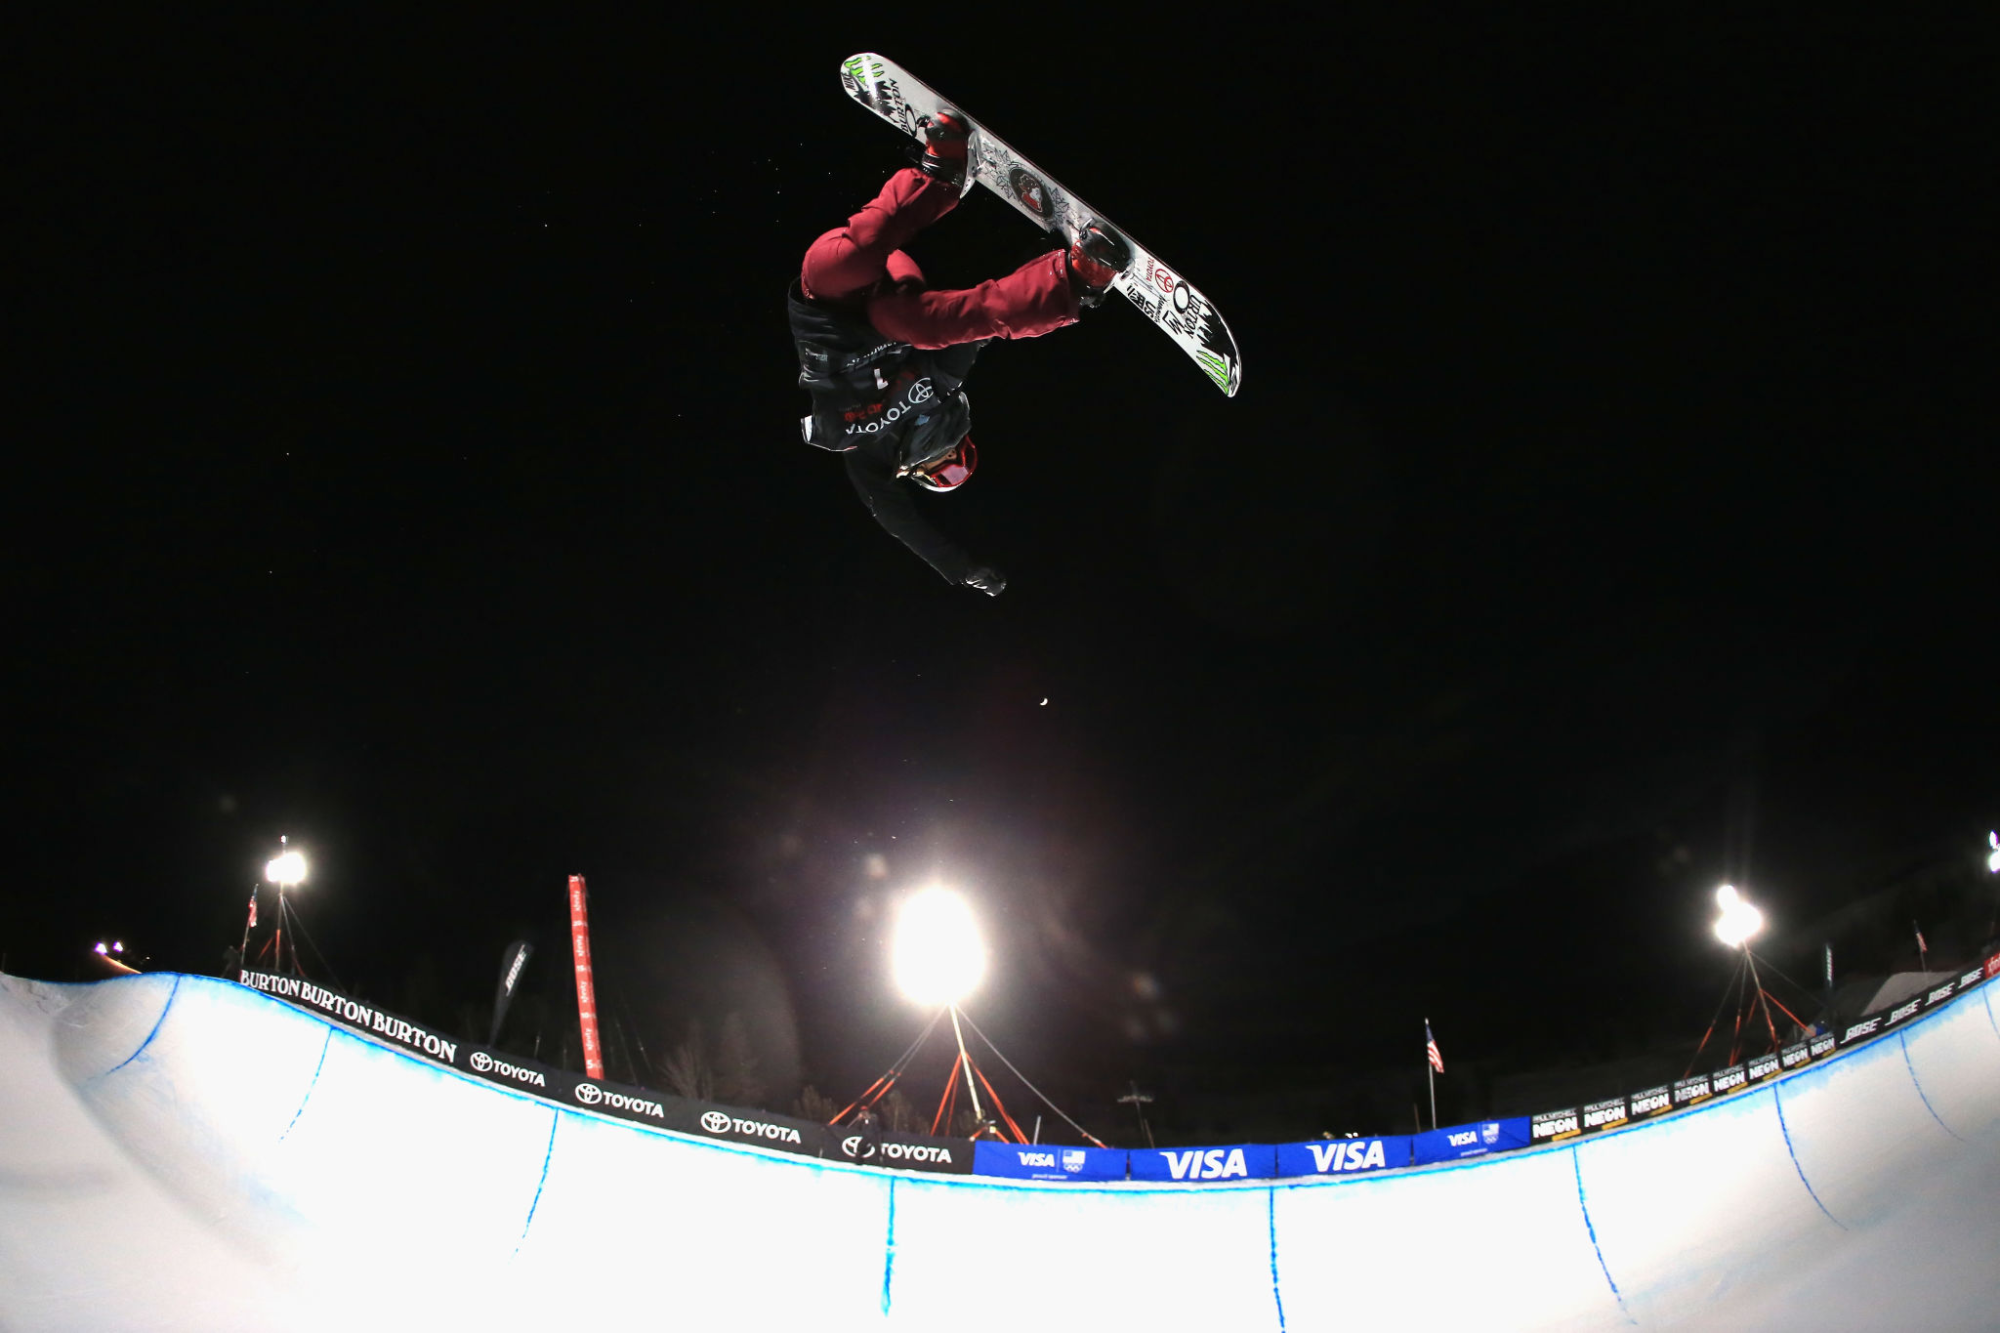 MAMMOTH, CA - JANUARY 20: Chloe Kim competes in the final round of the Ladies' Snowboard Halfpipe.